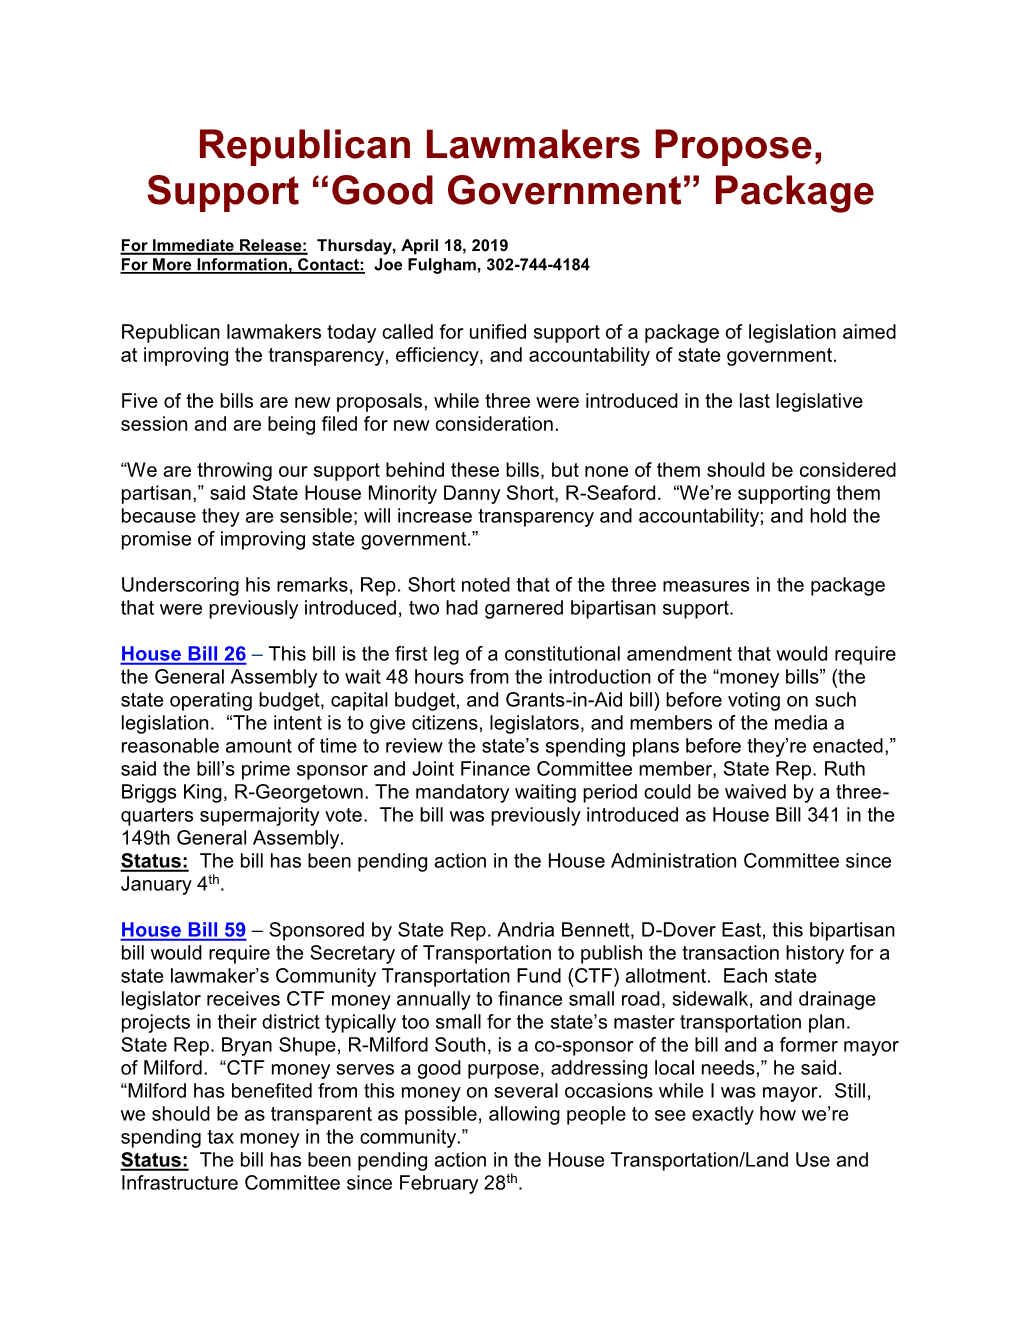 Good Government” Package